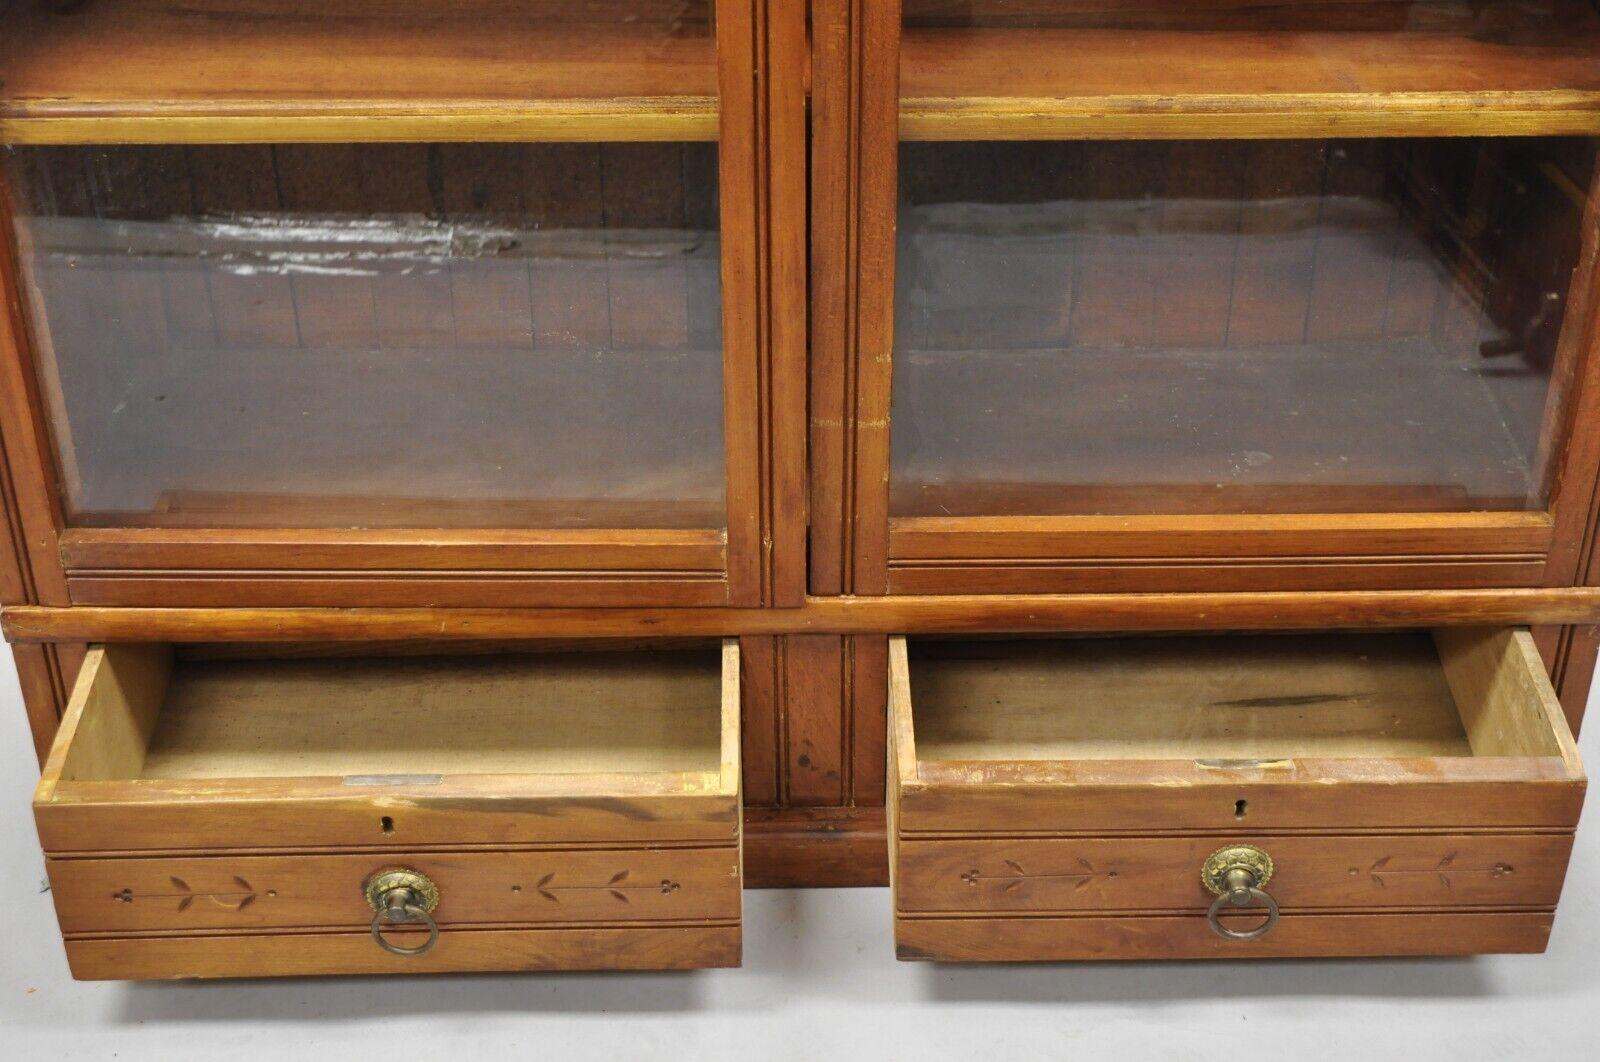 19th Century Antique Eastlake Victorian Chestnut 2 Door Bookcase China Cabinet with Drawers For Sale